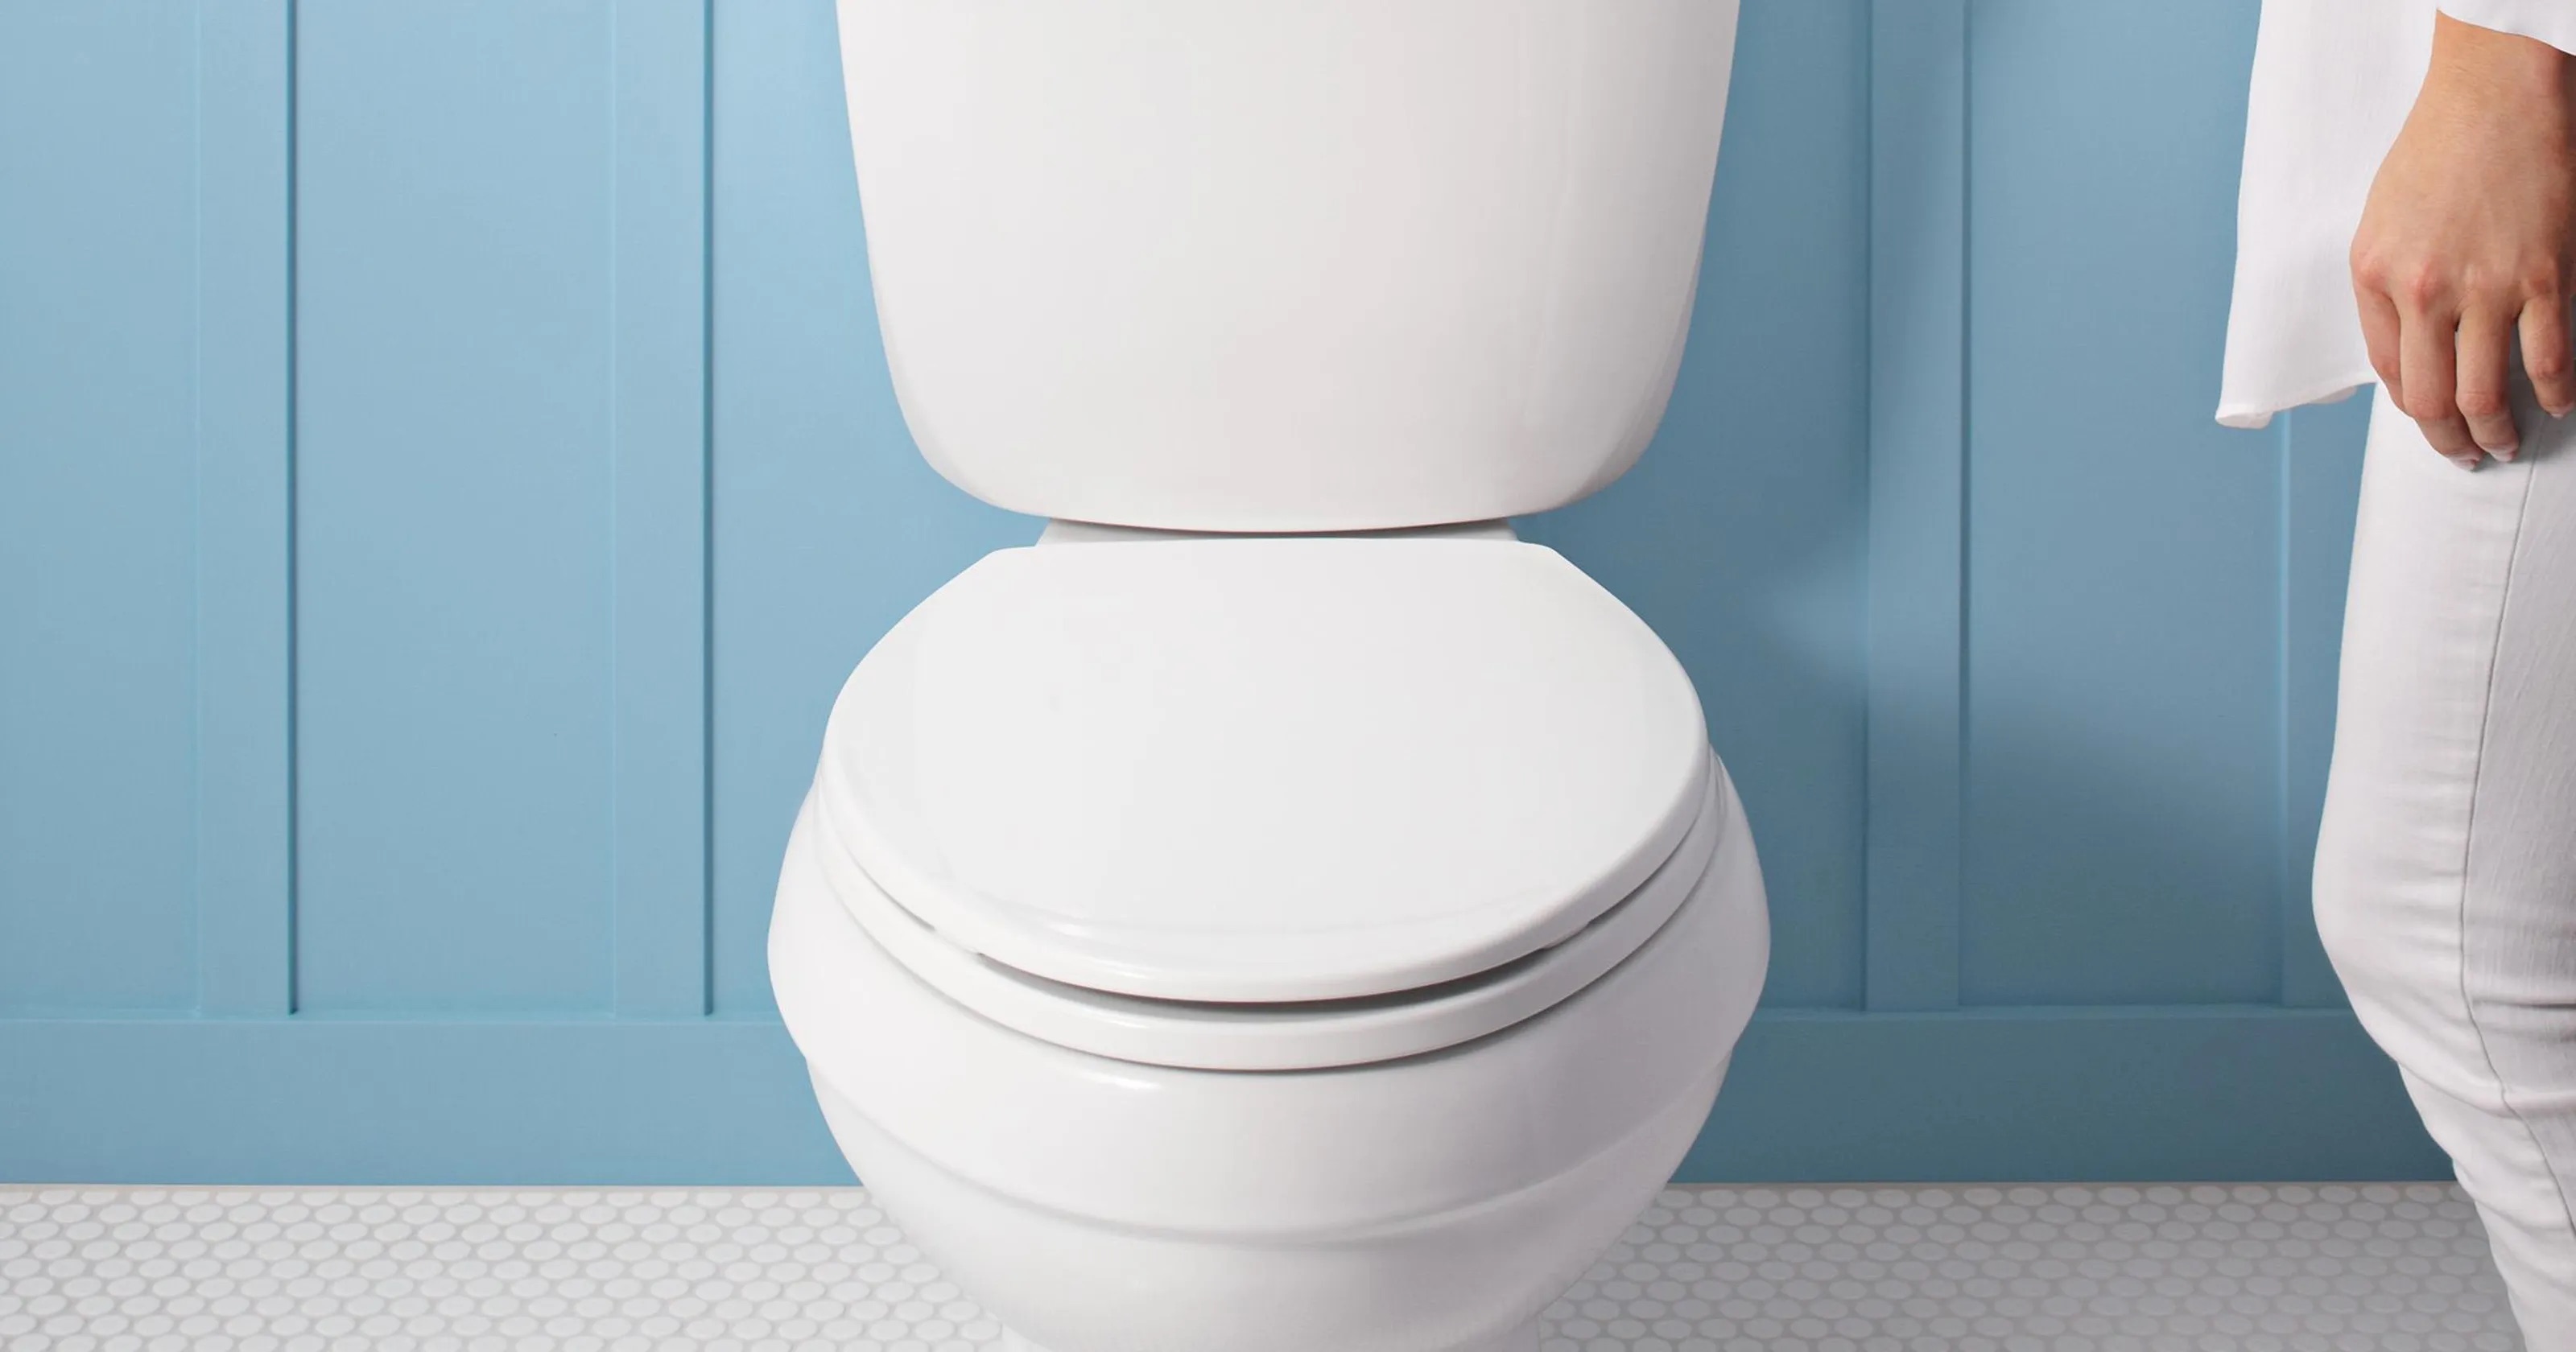 What Is The Standard Height Of A Toilet